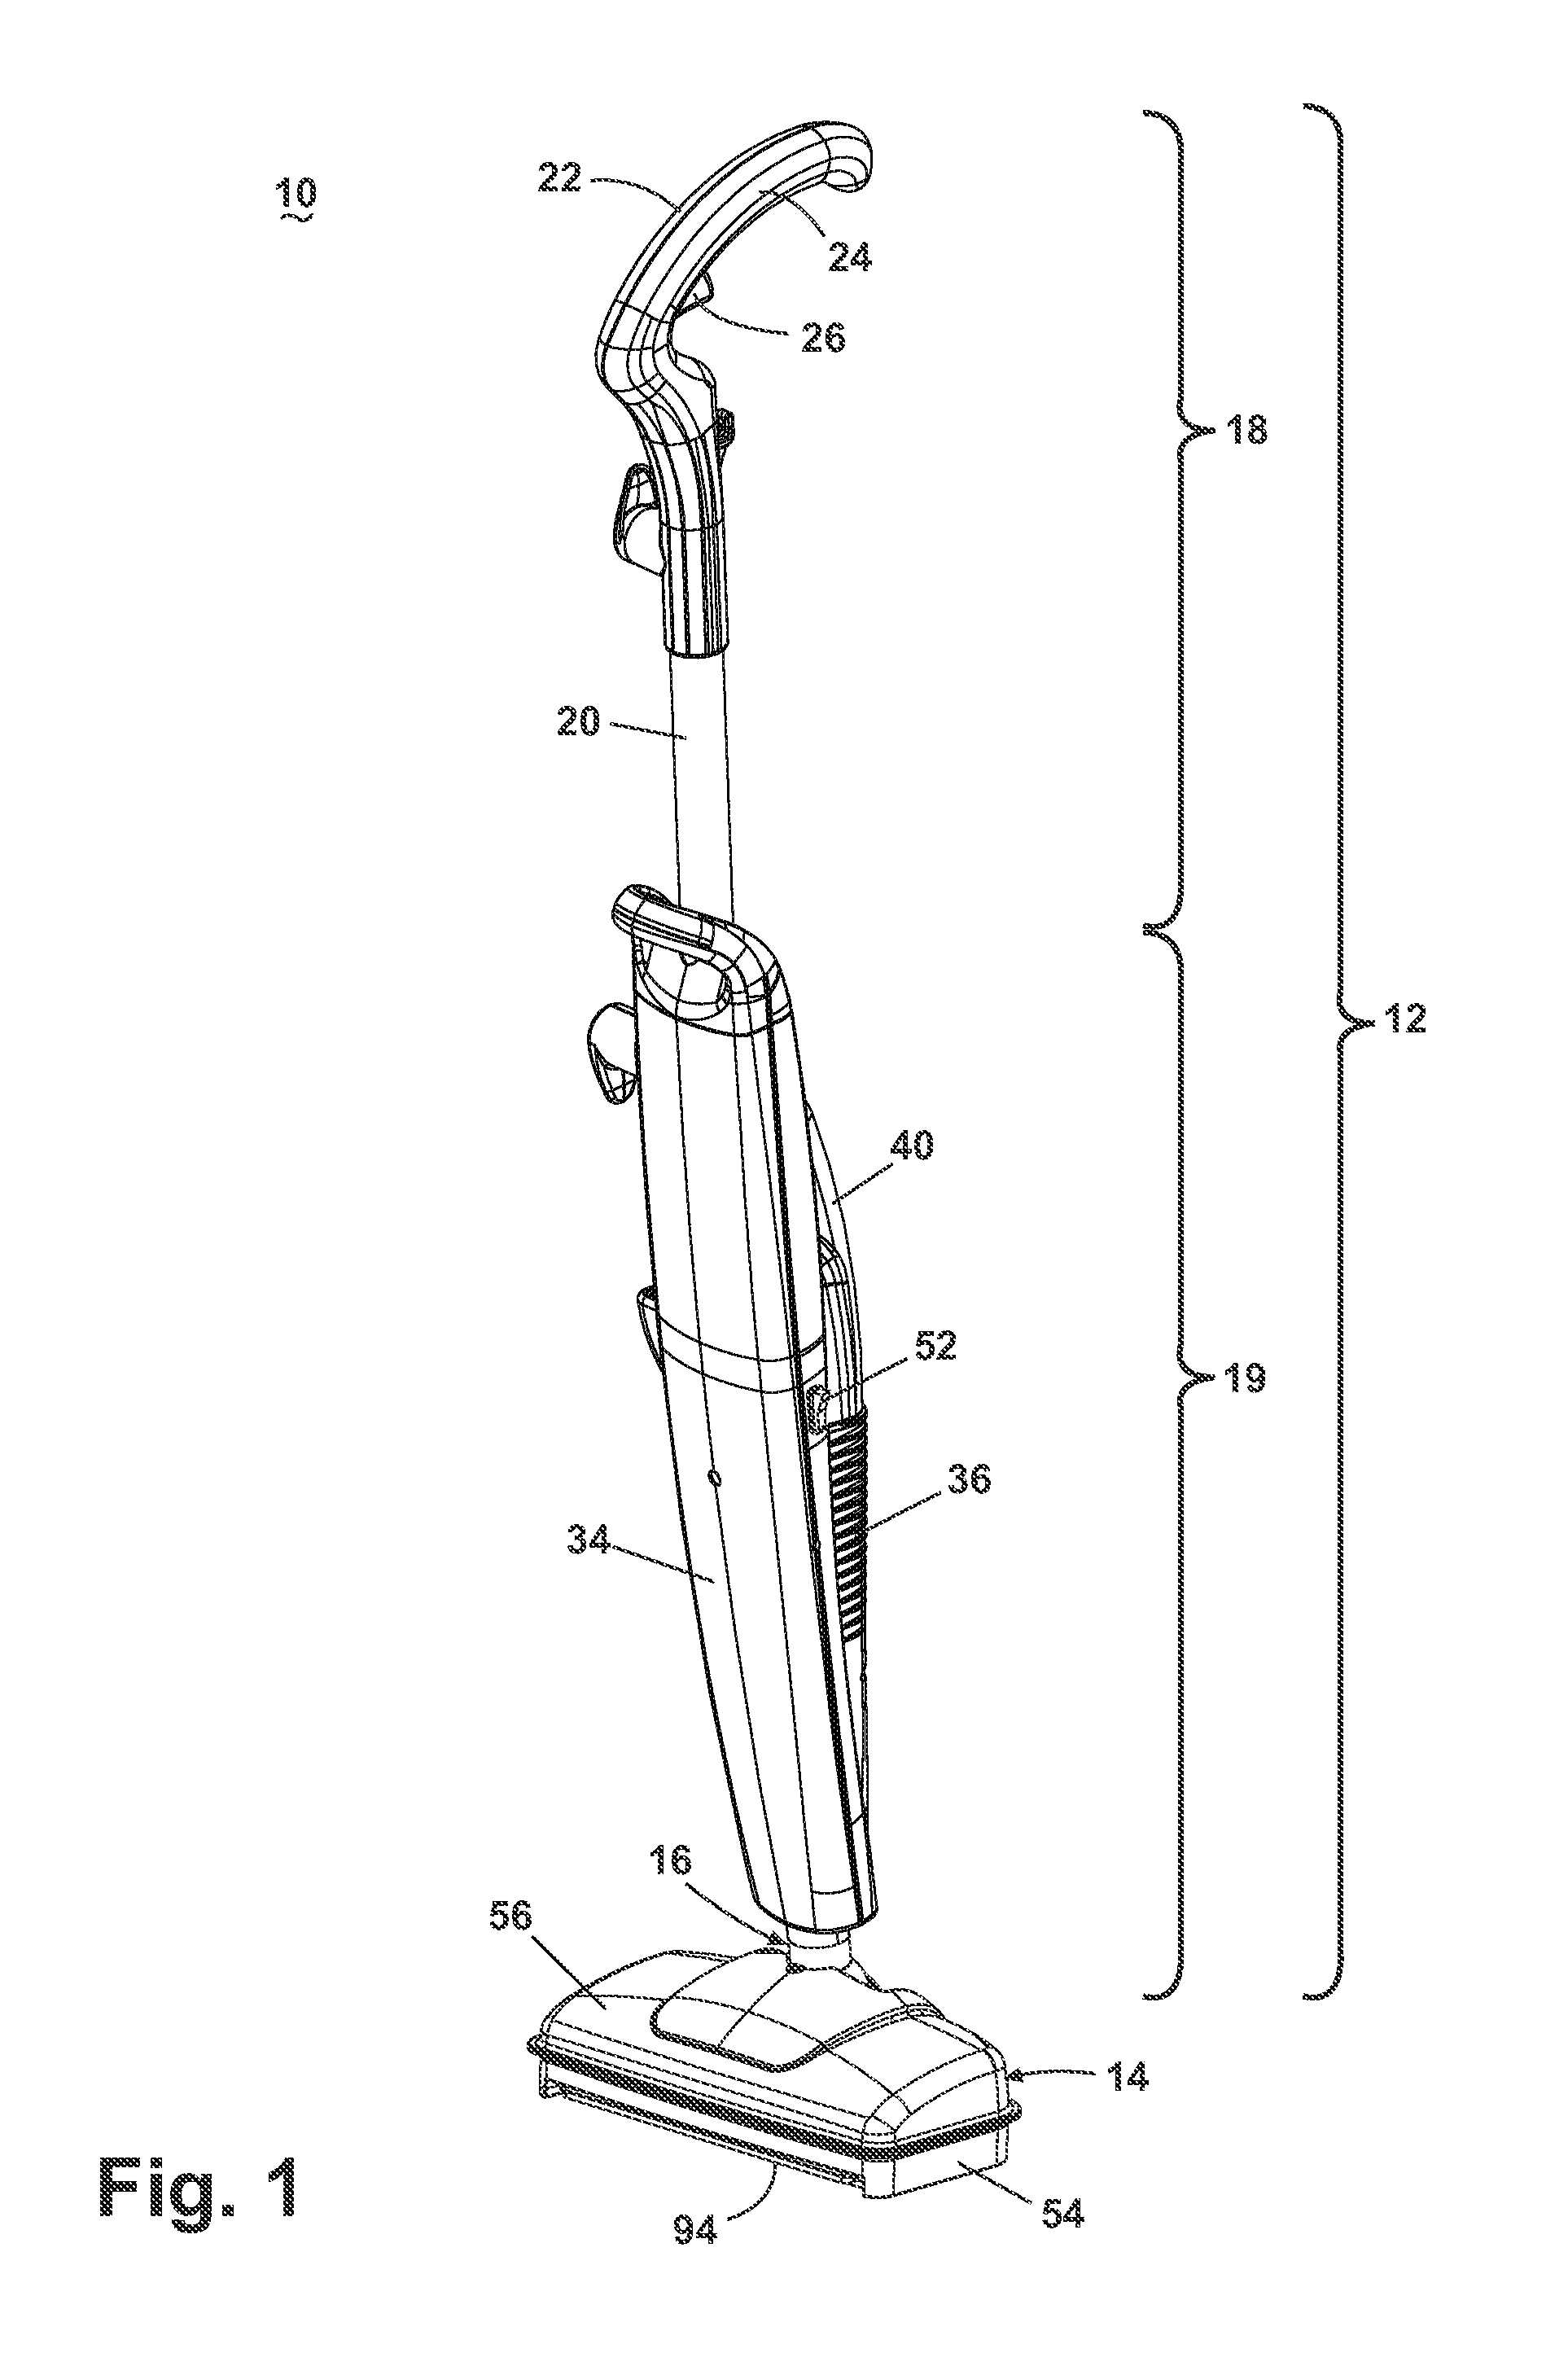 Steam mop with shuttling steam distributor